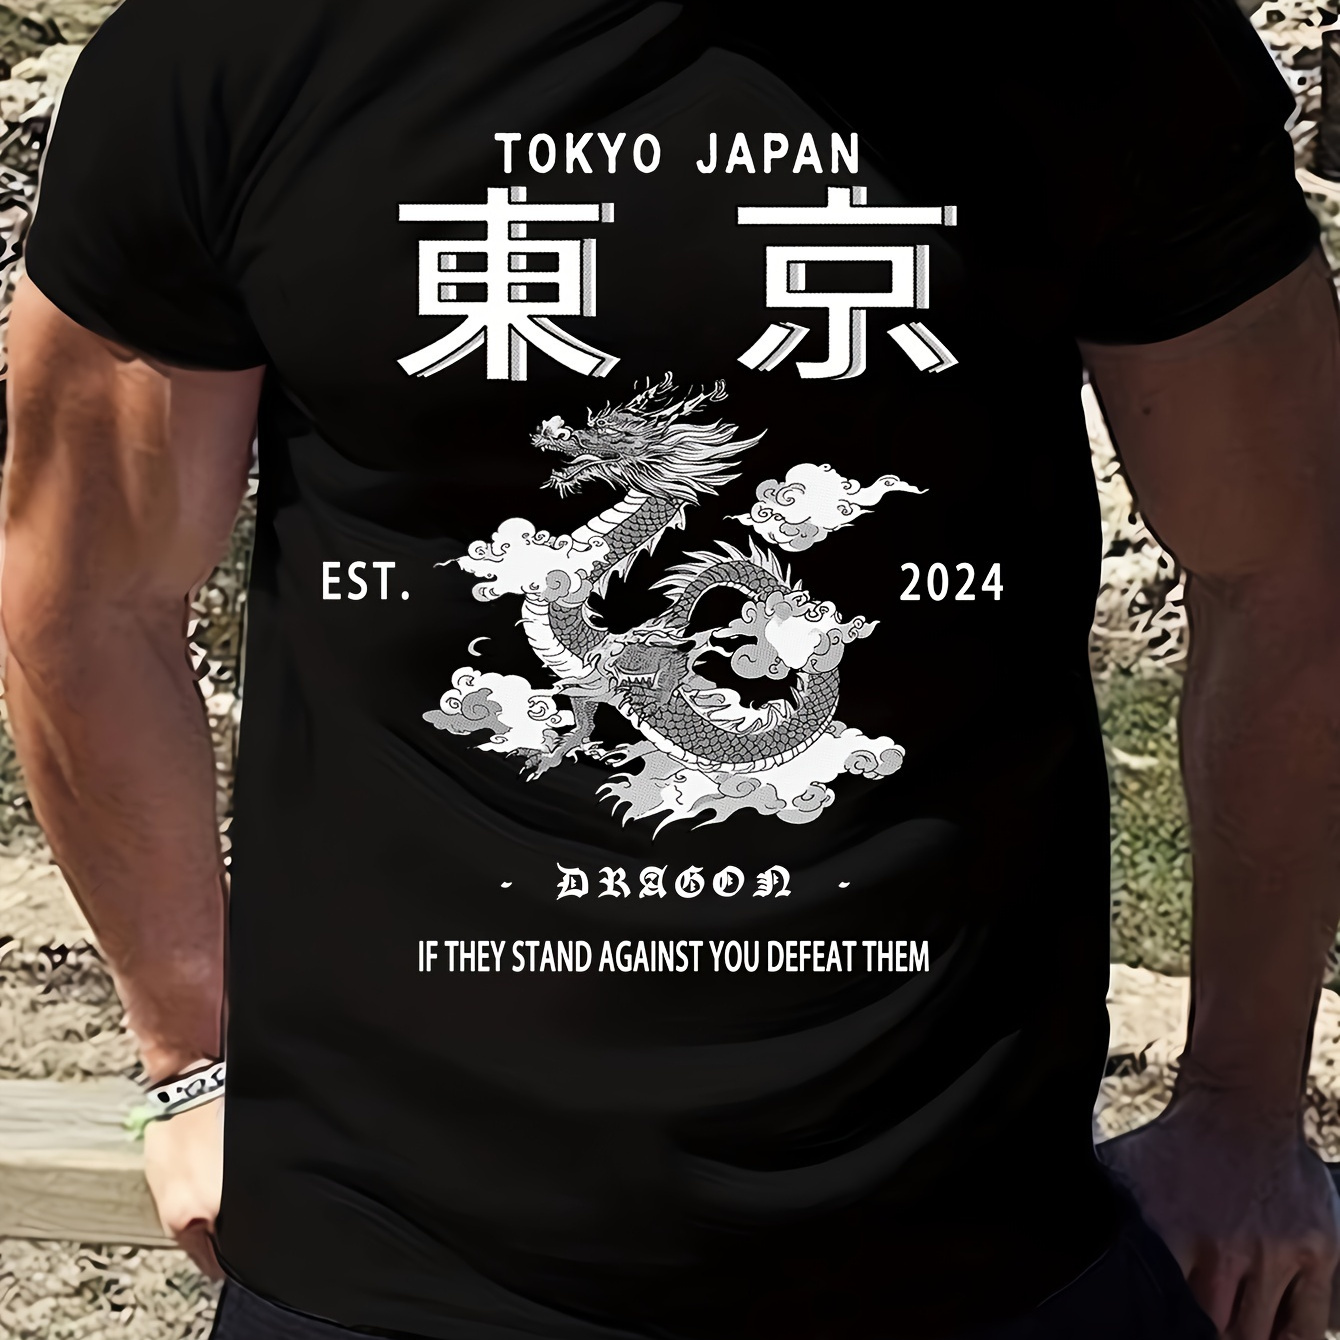 

Tokyo Japan And Chinese Characters Print, Men's Comfy T-shirt, Casual Fit Tee, Cool Top Clothing For Men For Summer For Everyday Activities